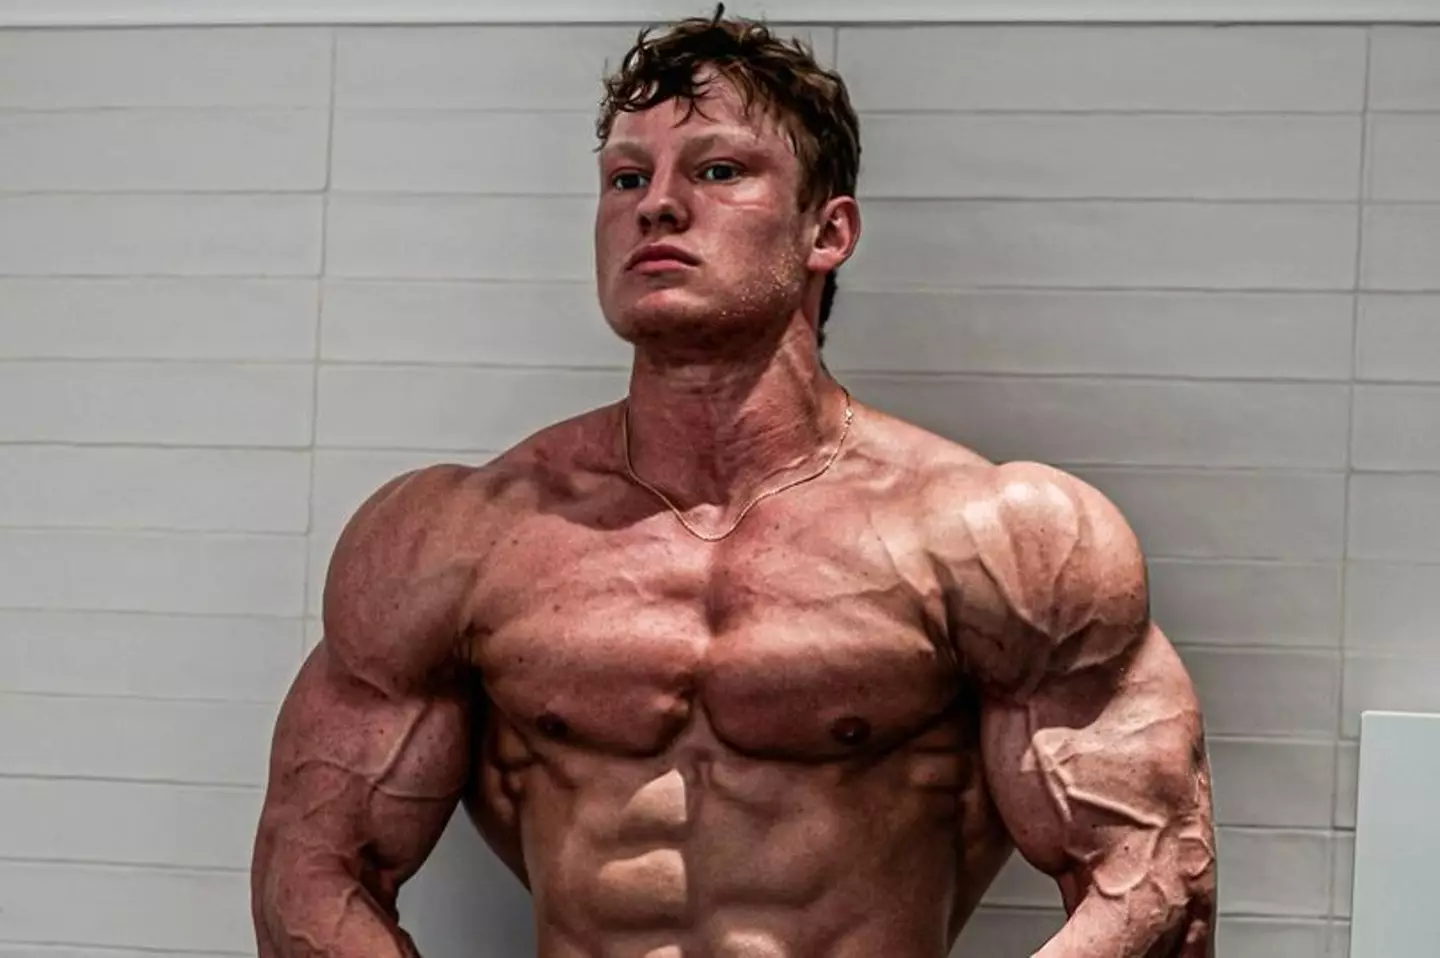 A 19-year-old has obliterated Arnold Schwarzenegger’s 57-year bodybuilding record.